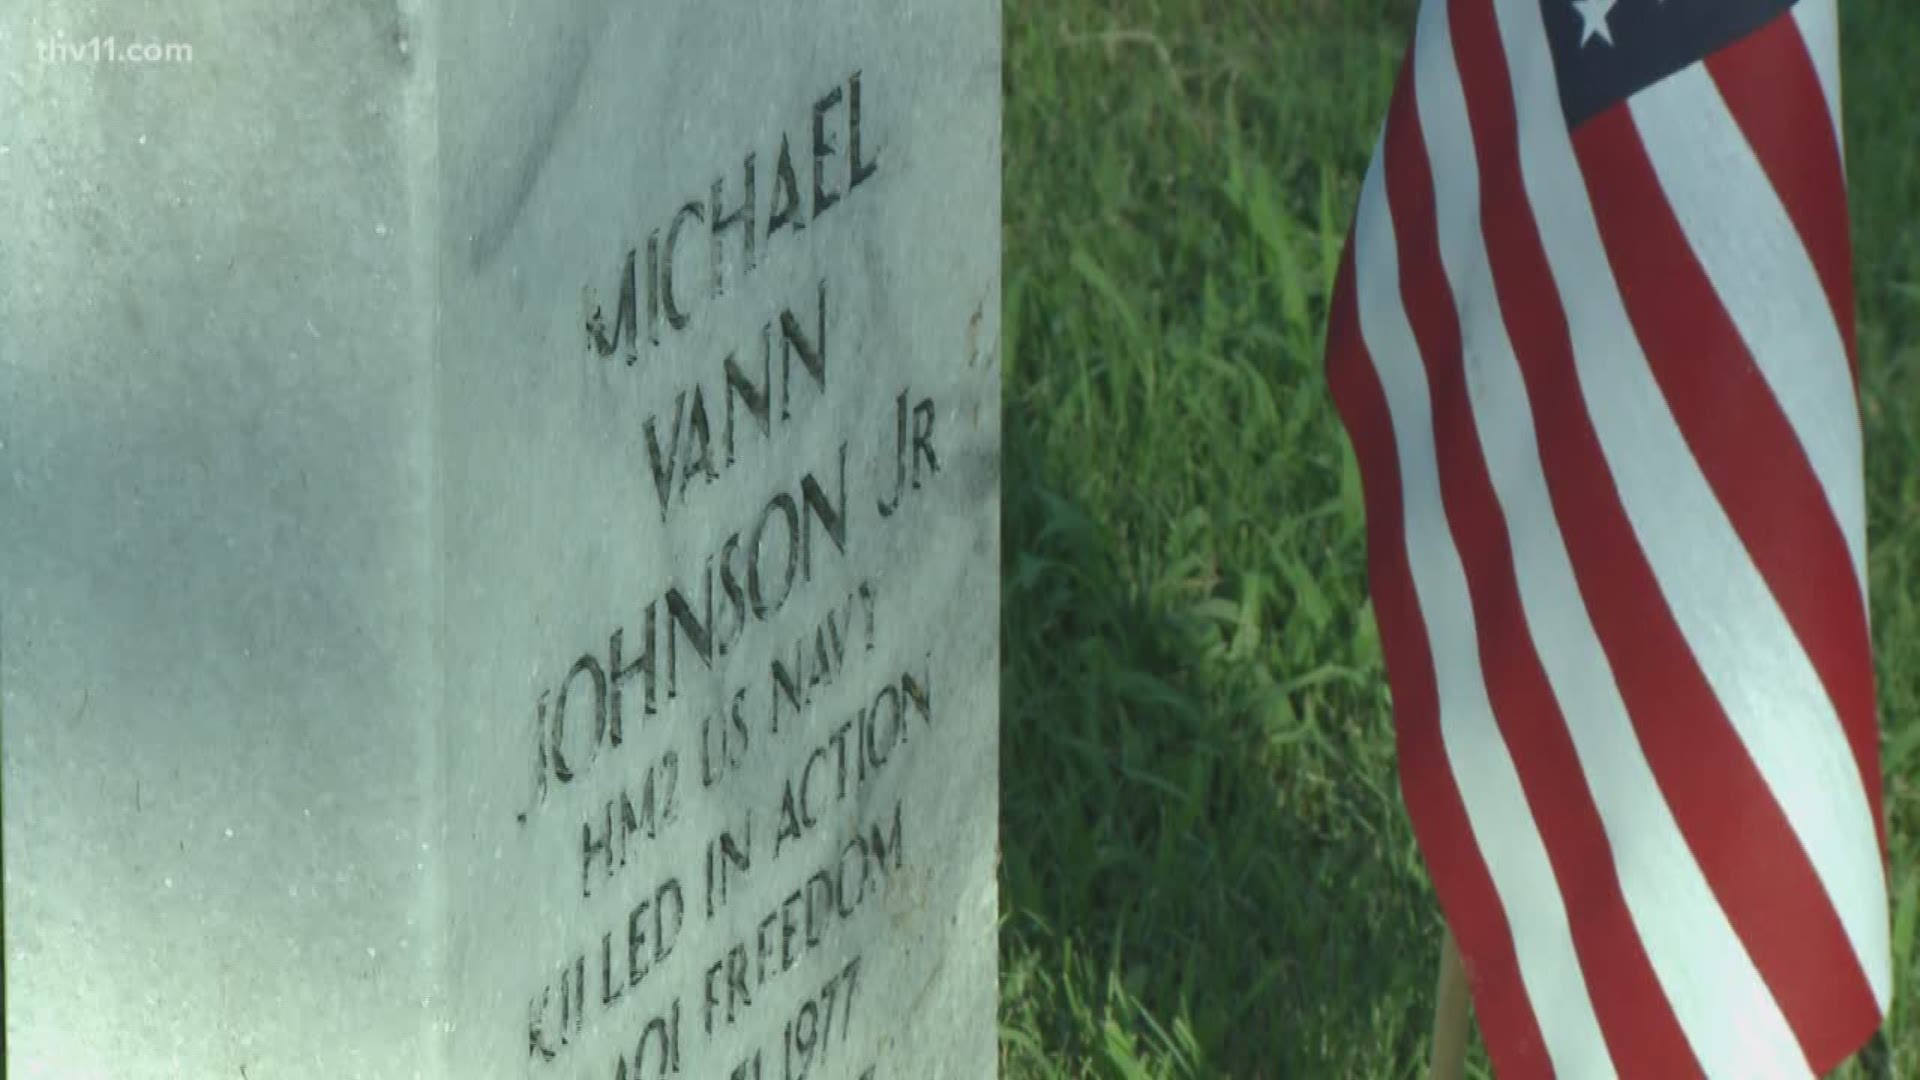 Family honors their son, the first Arkansan who died in Iraq.